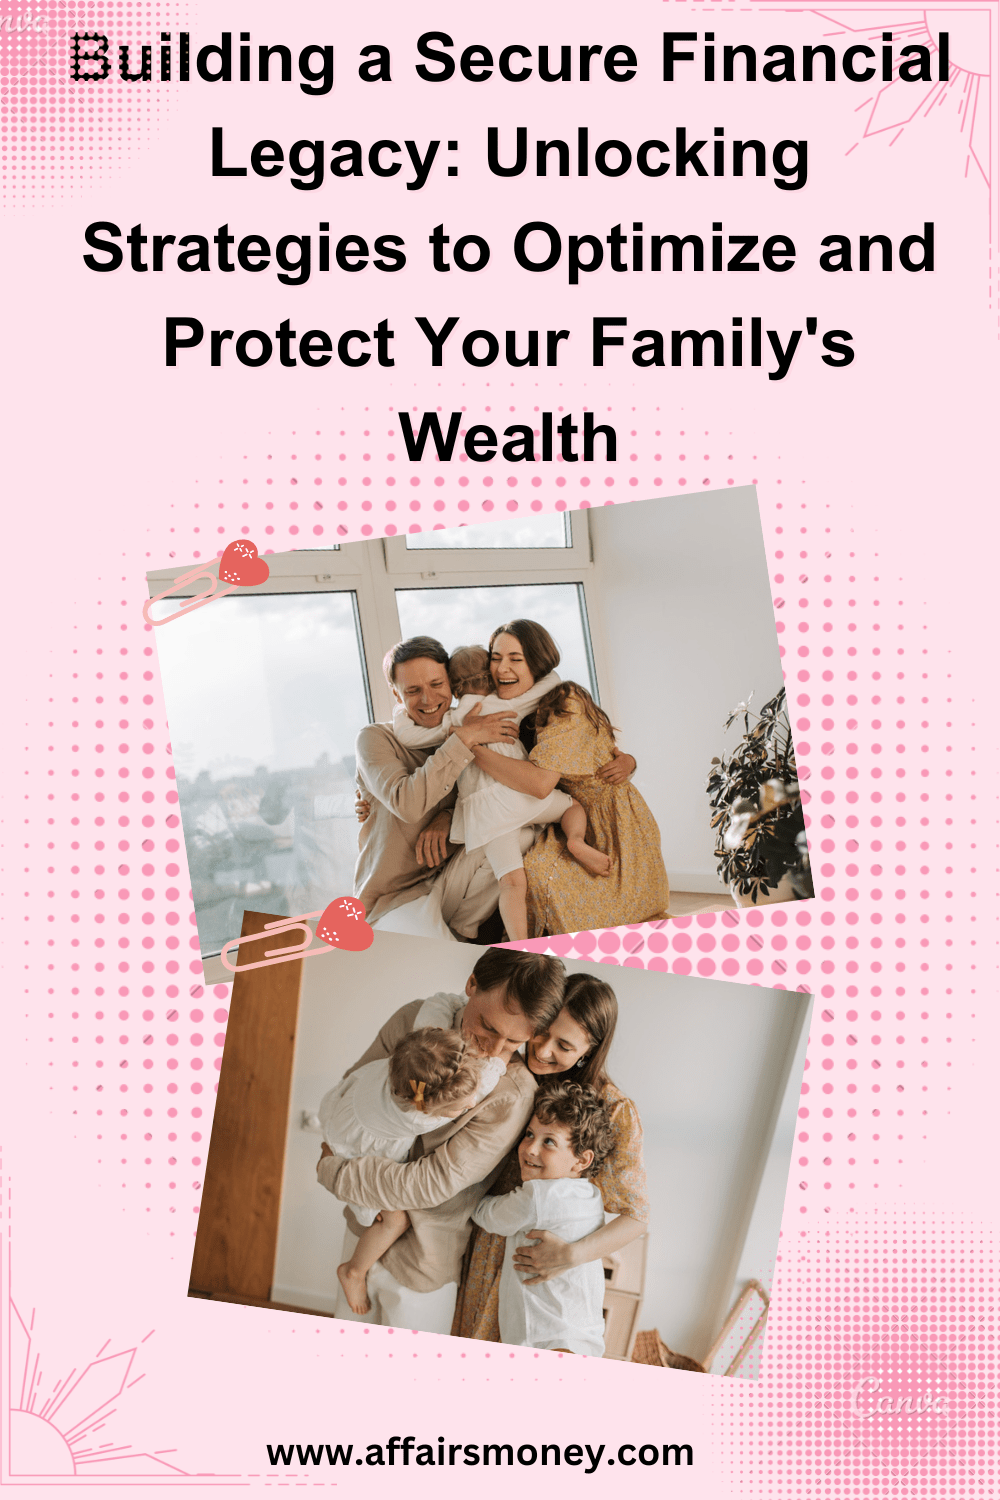 Protect Your Family's Wealth